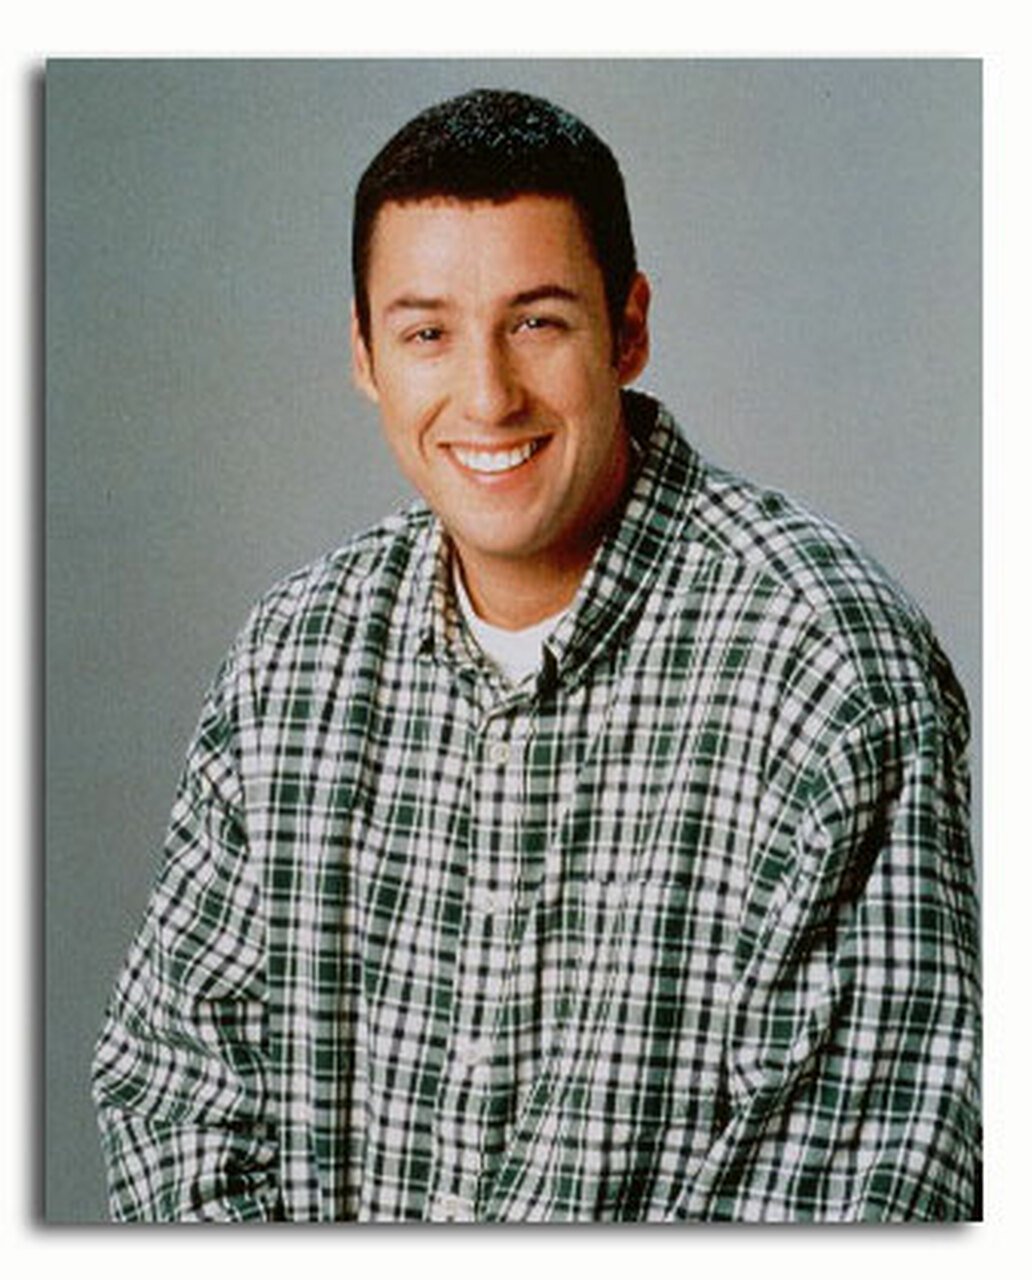 SS3111615) Movie picture of Adam Sandler buy celebrity photo and posters at Starstills.com